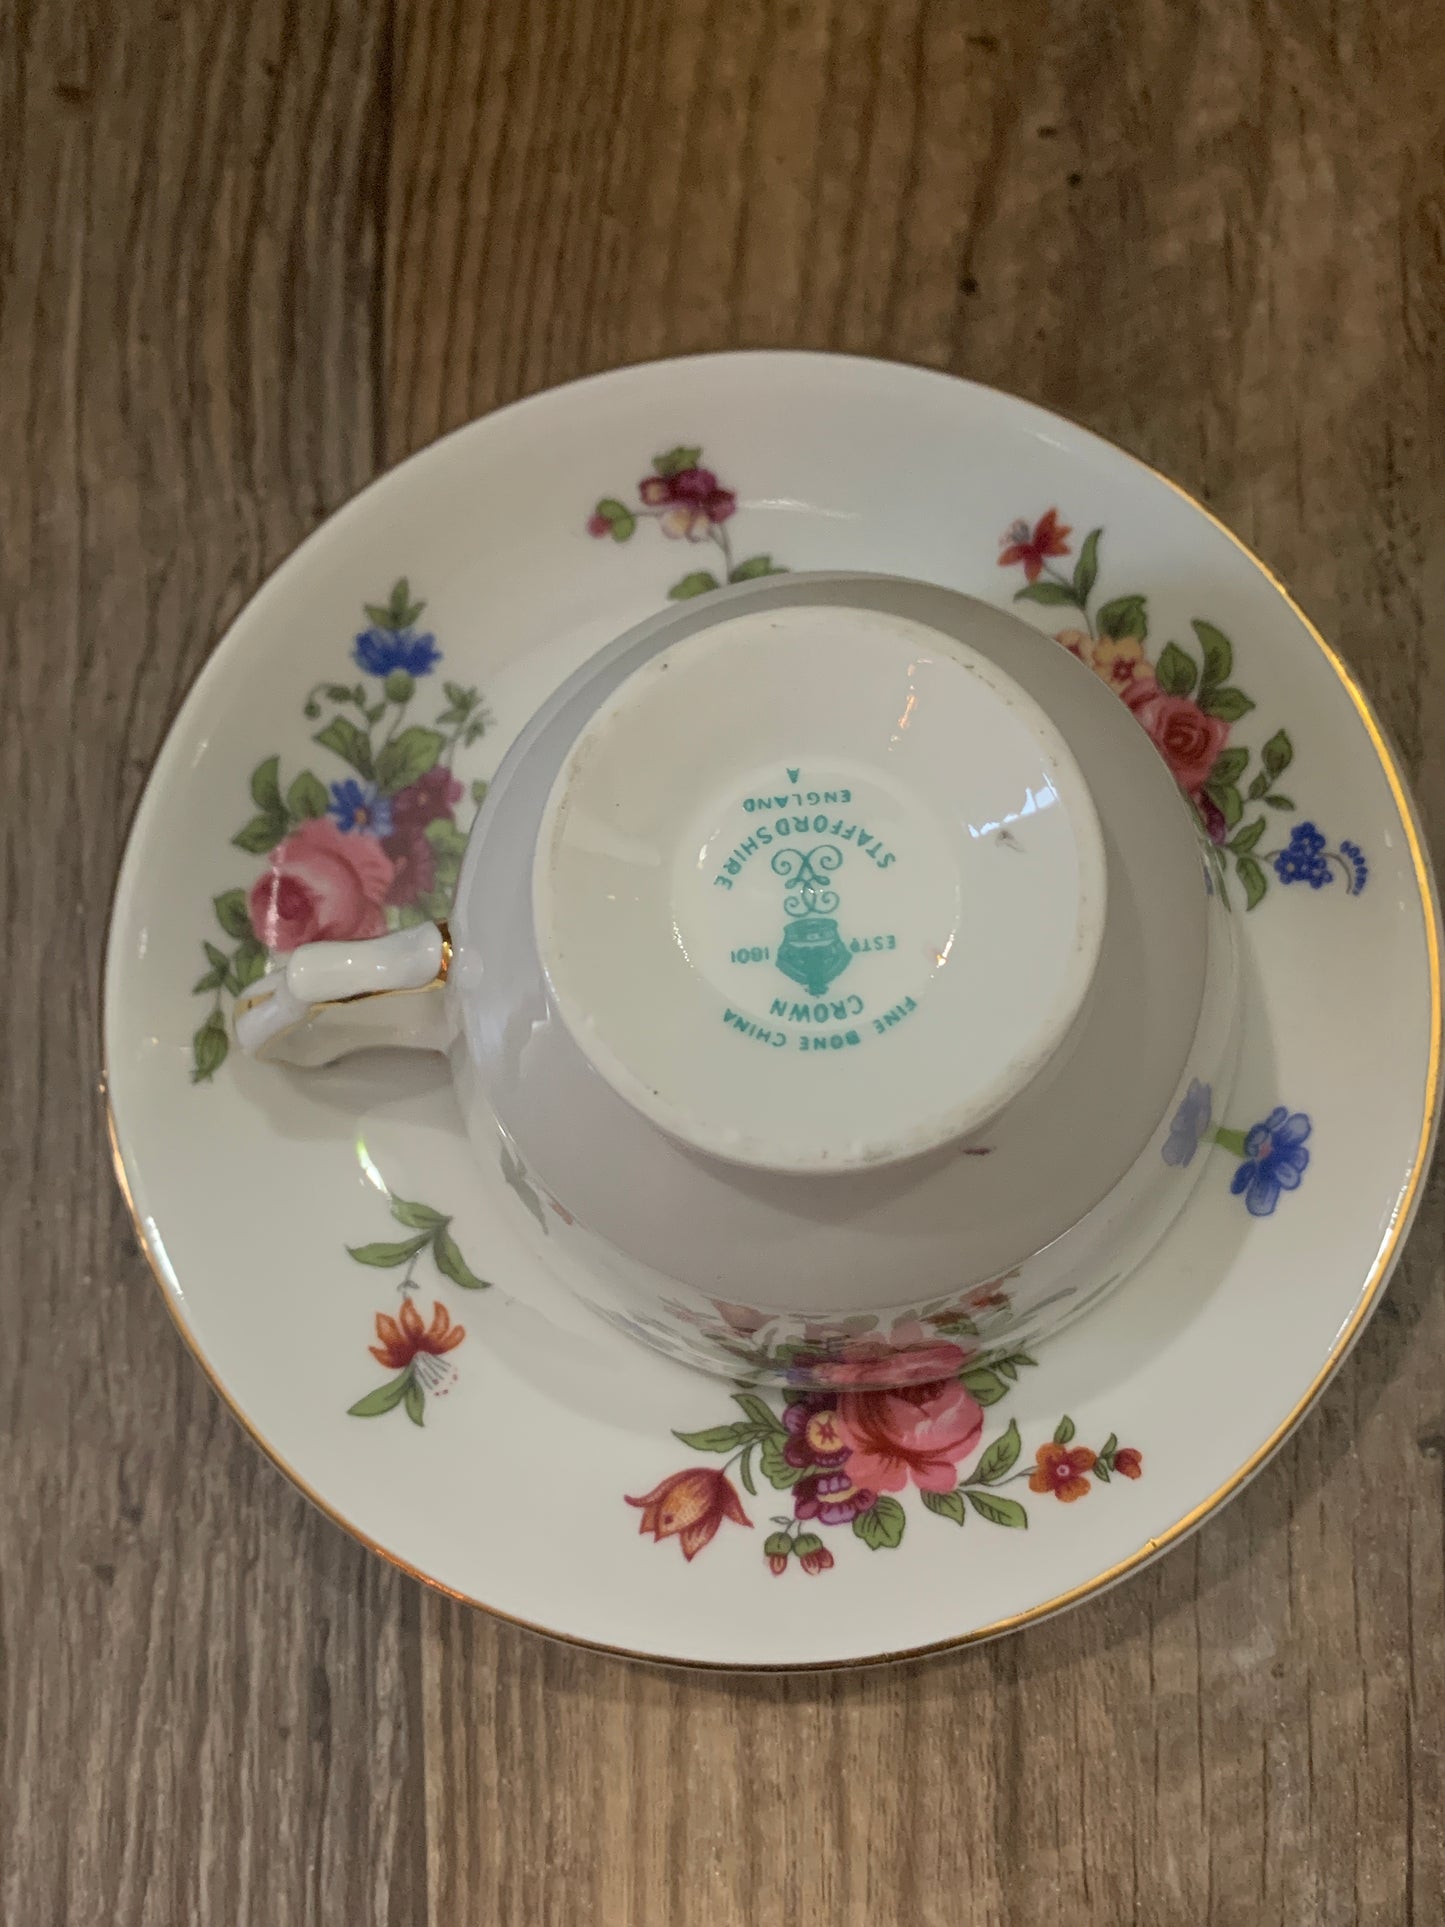 Vintage Teacup with Floral Pattern Staffordshire Tea Cup with Rose Bouquet Mothers Day Gifts